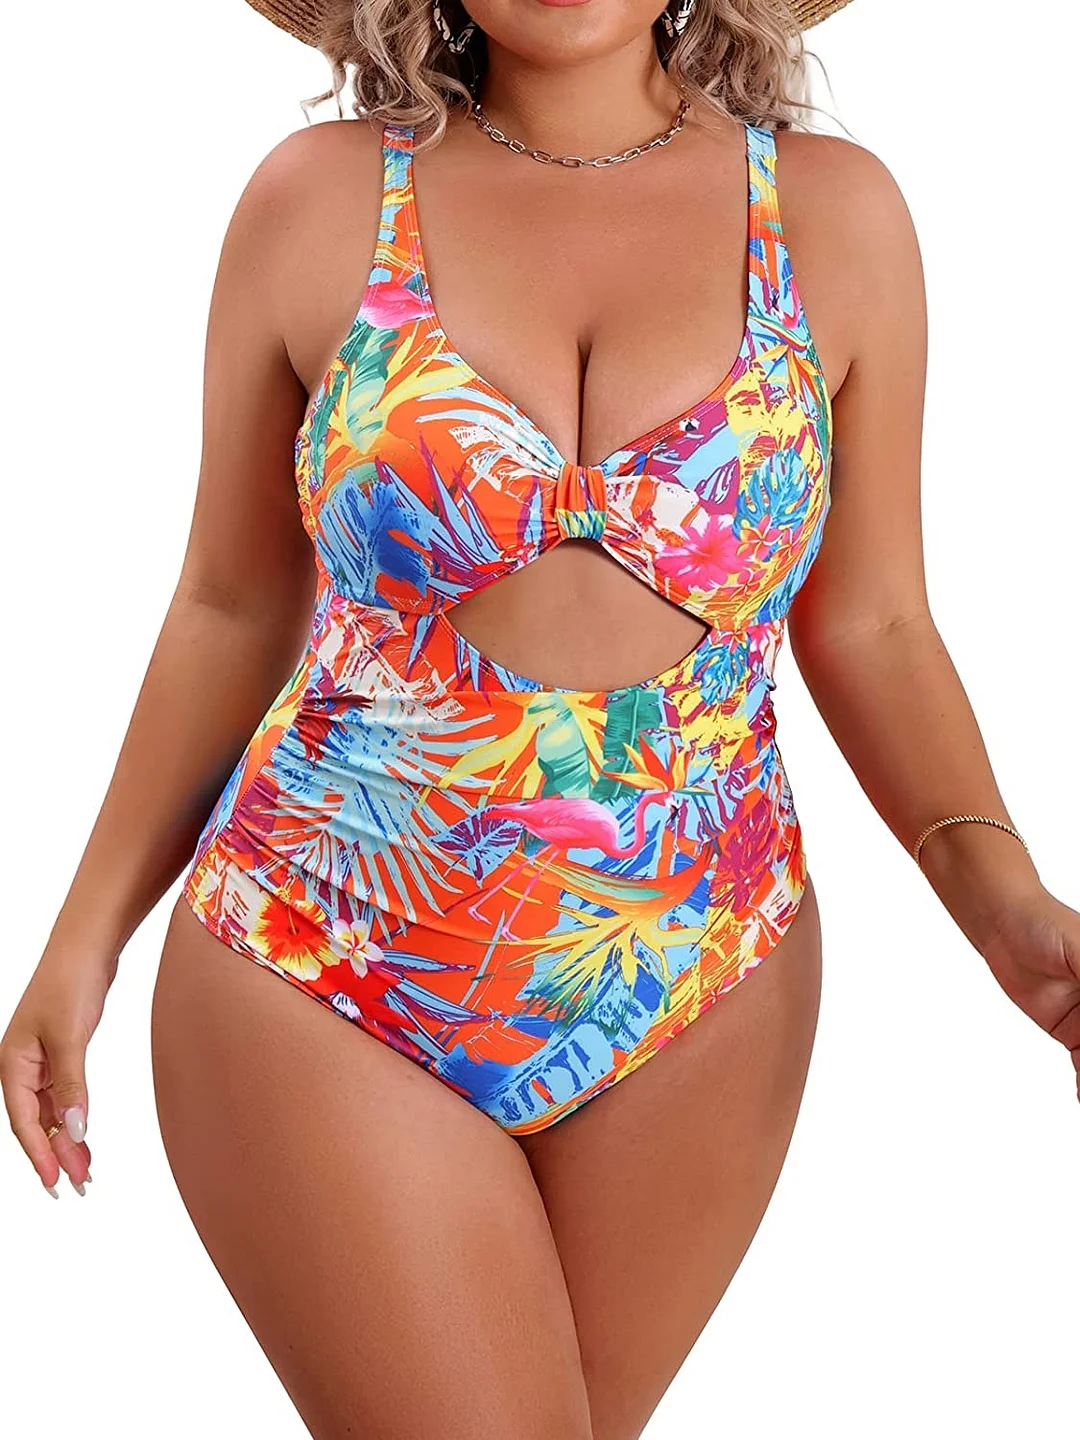 V Neck Cut Out One Piece Plus Size Swimsuits